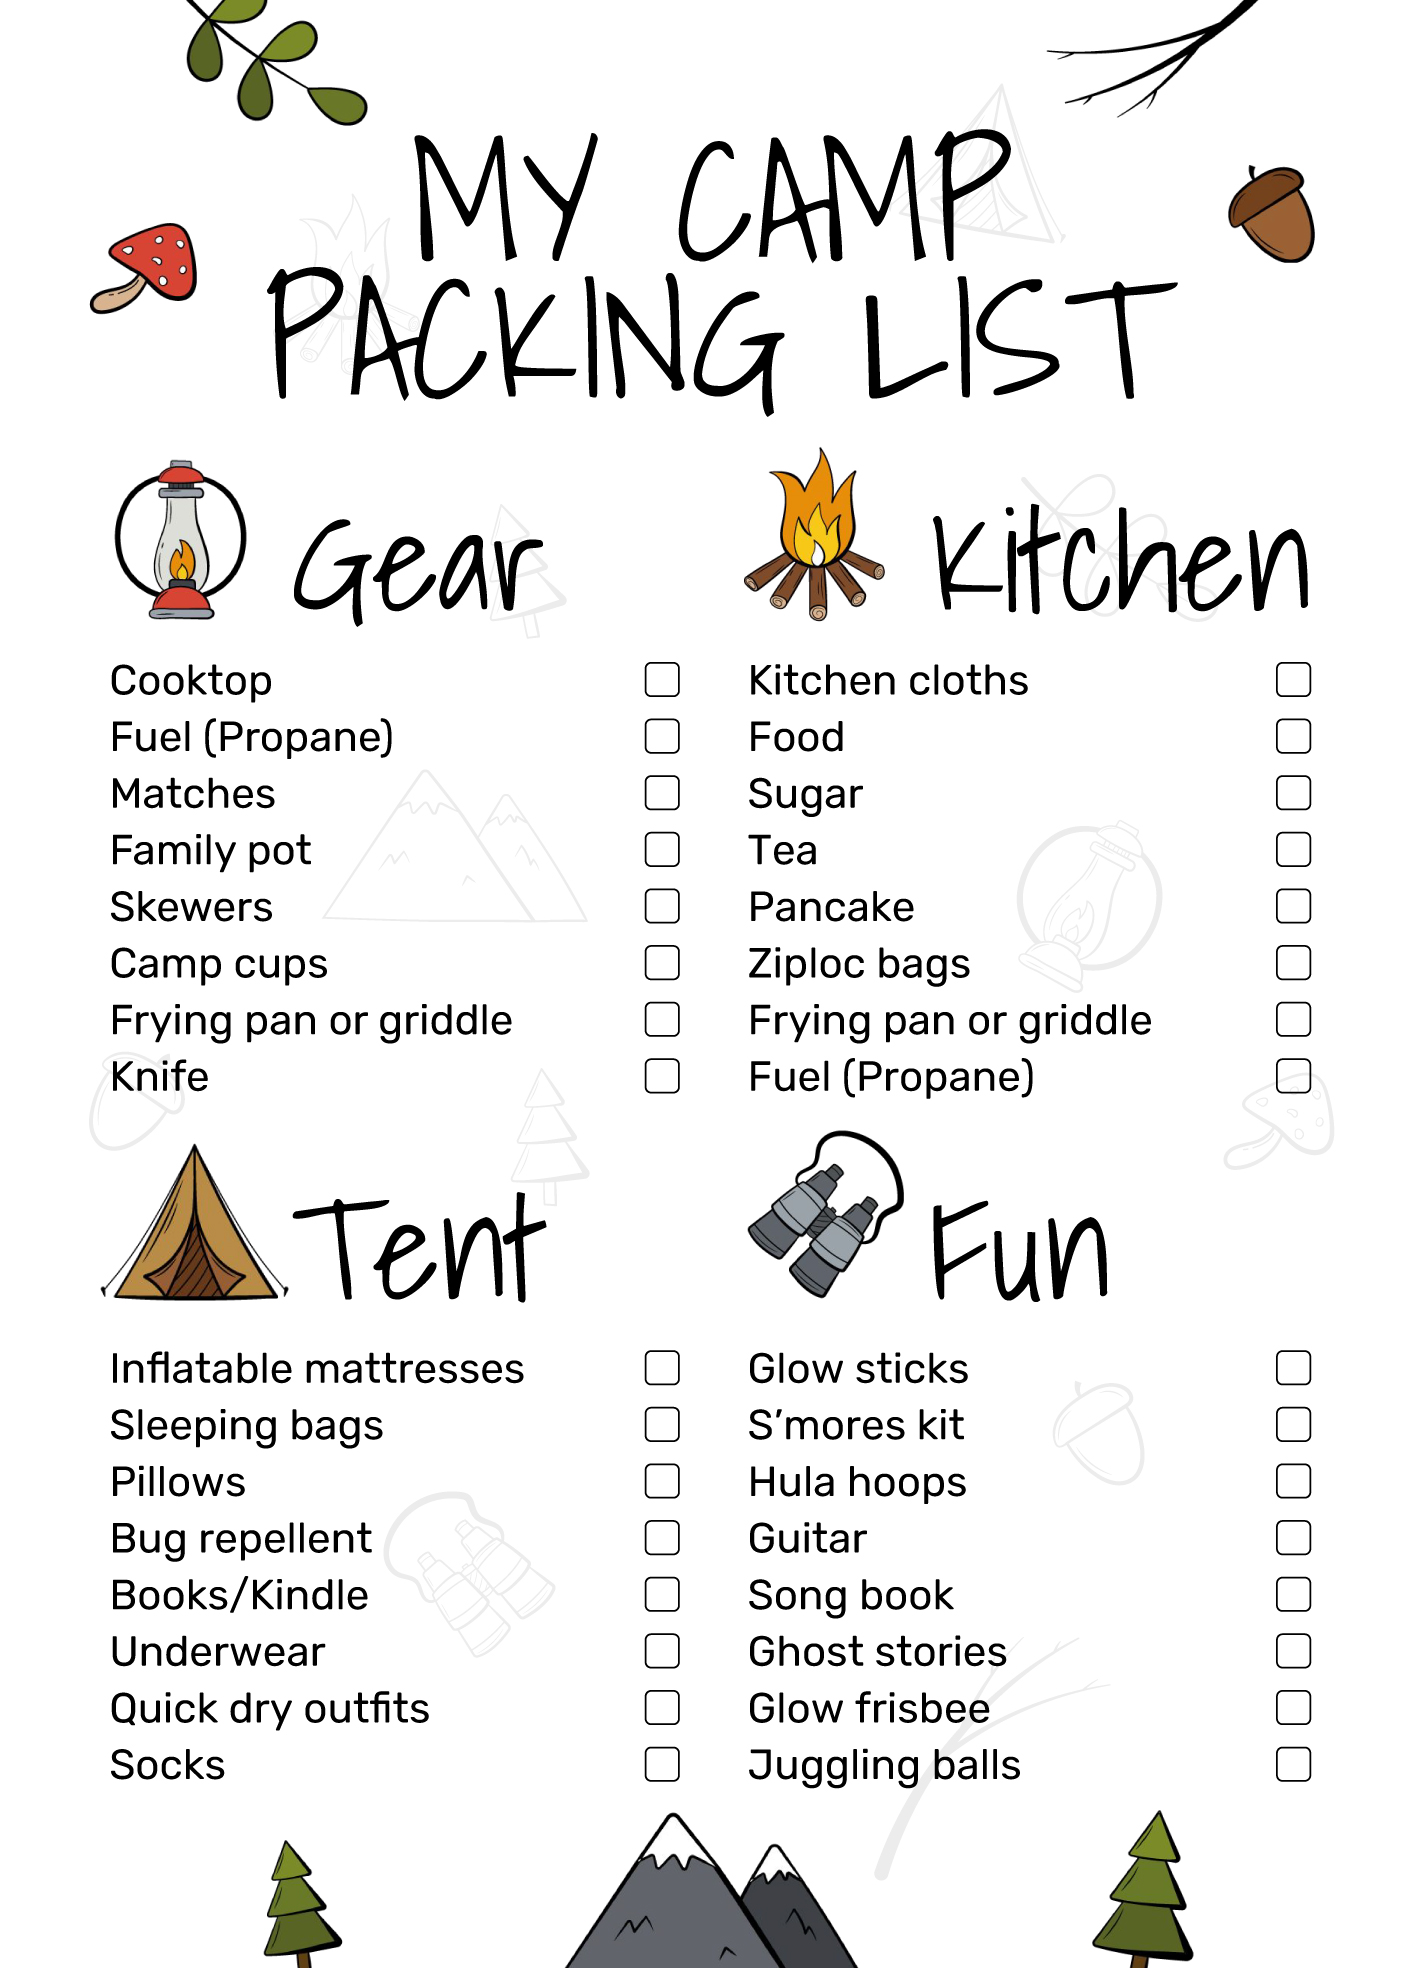 Camping Essentials Checklist - What To Take Camping